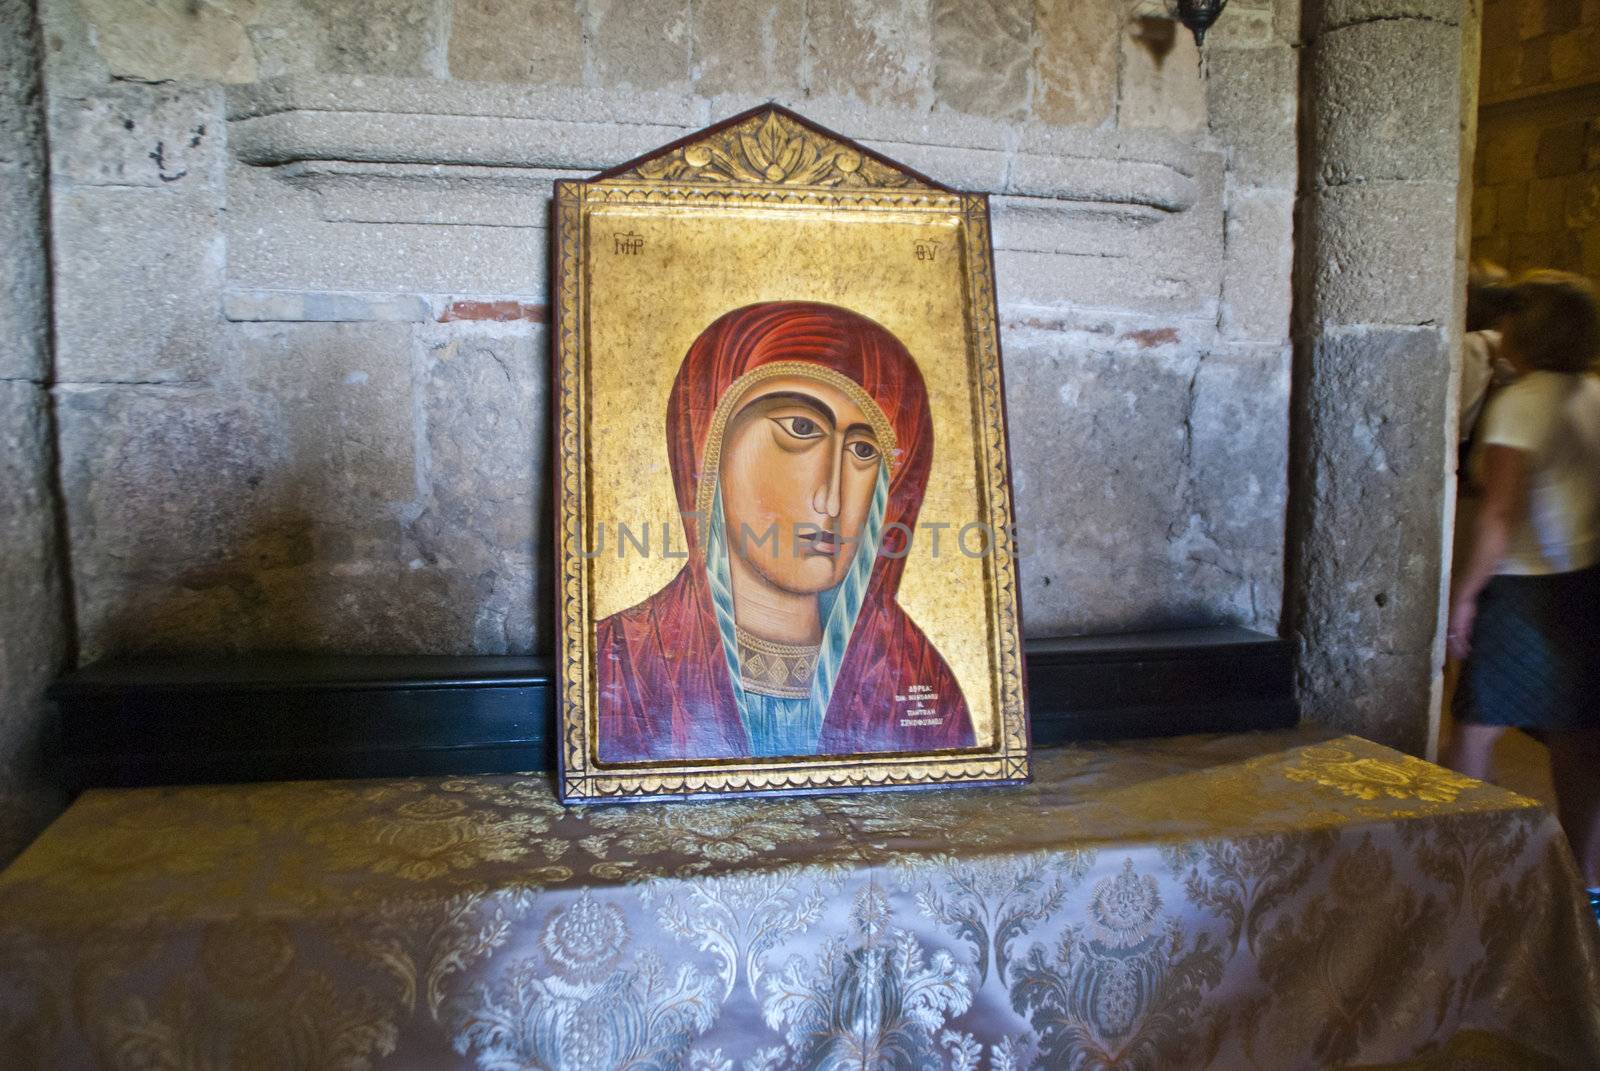 image is shot when we vacationed in rhodes, autumn 2012 and painting of the virgin mary is located inside in the monastery of Filerimos at Rhodes.